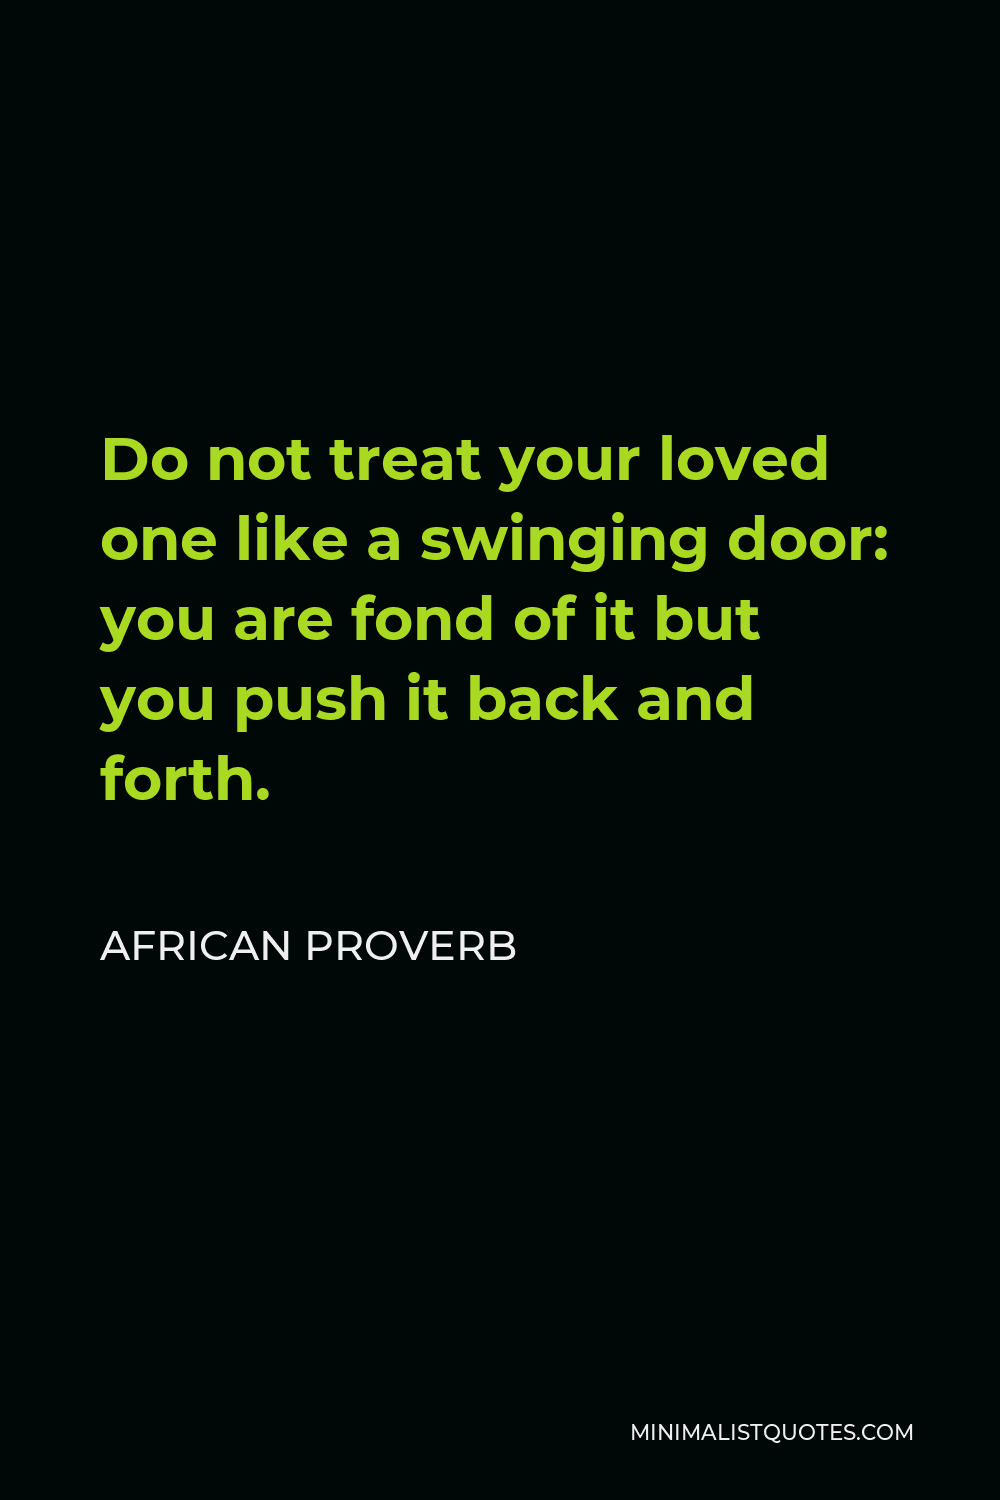 African Proverb Quote - Do not treat your loved one like a swinging door: you are fond of it but you push it back and forth.